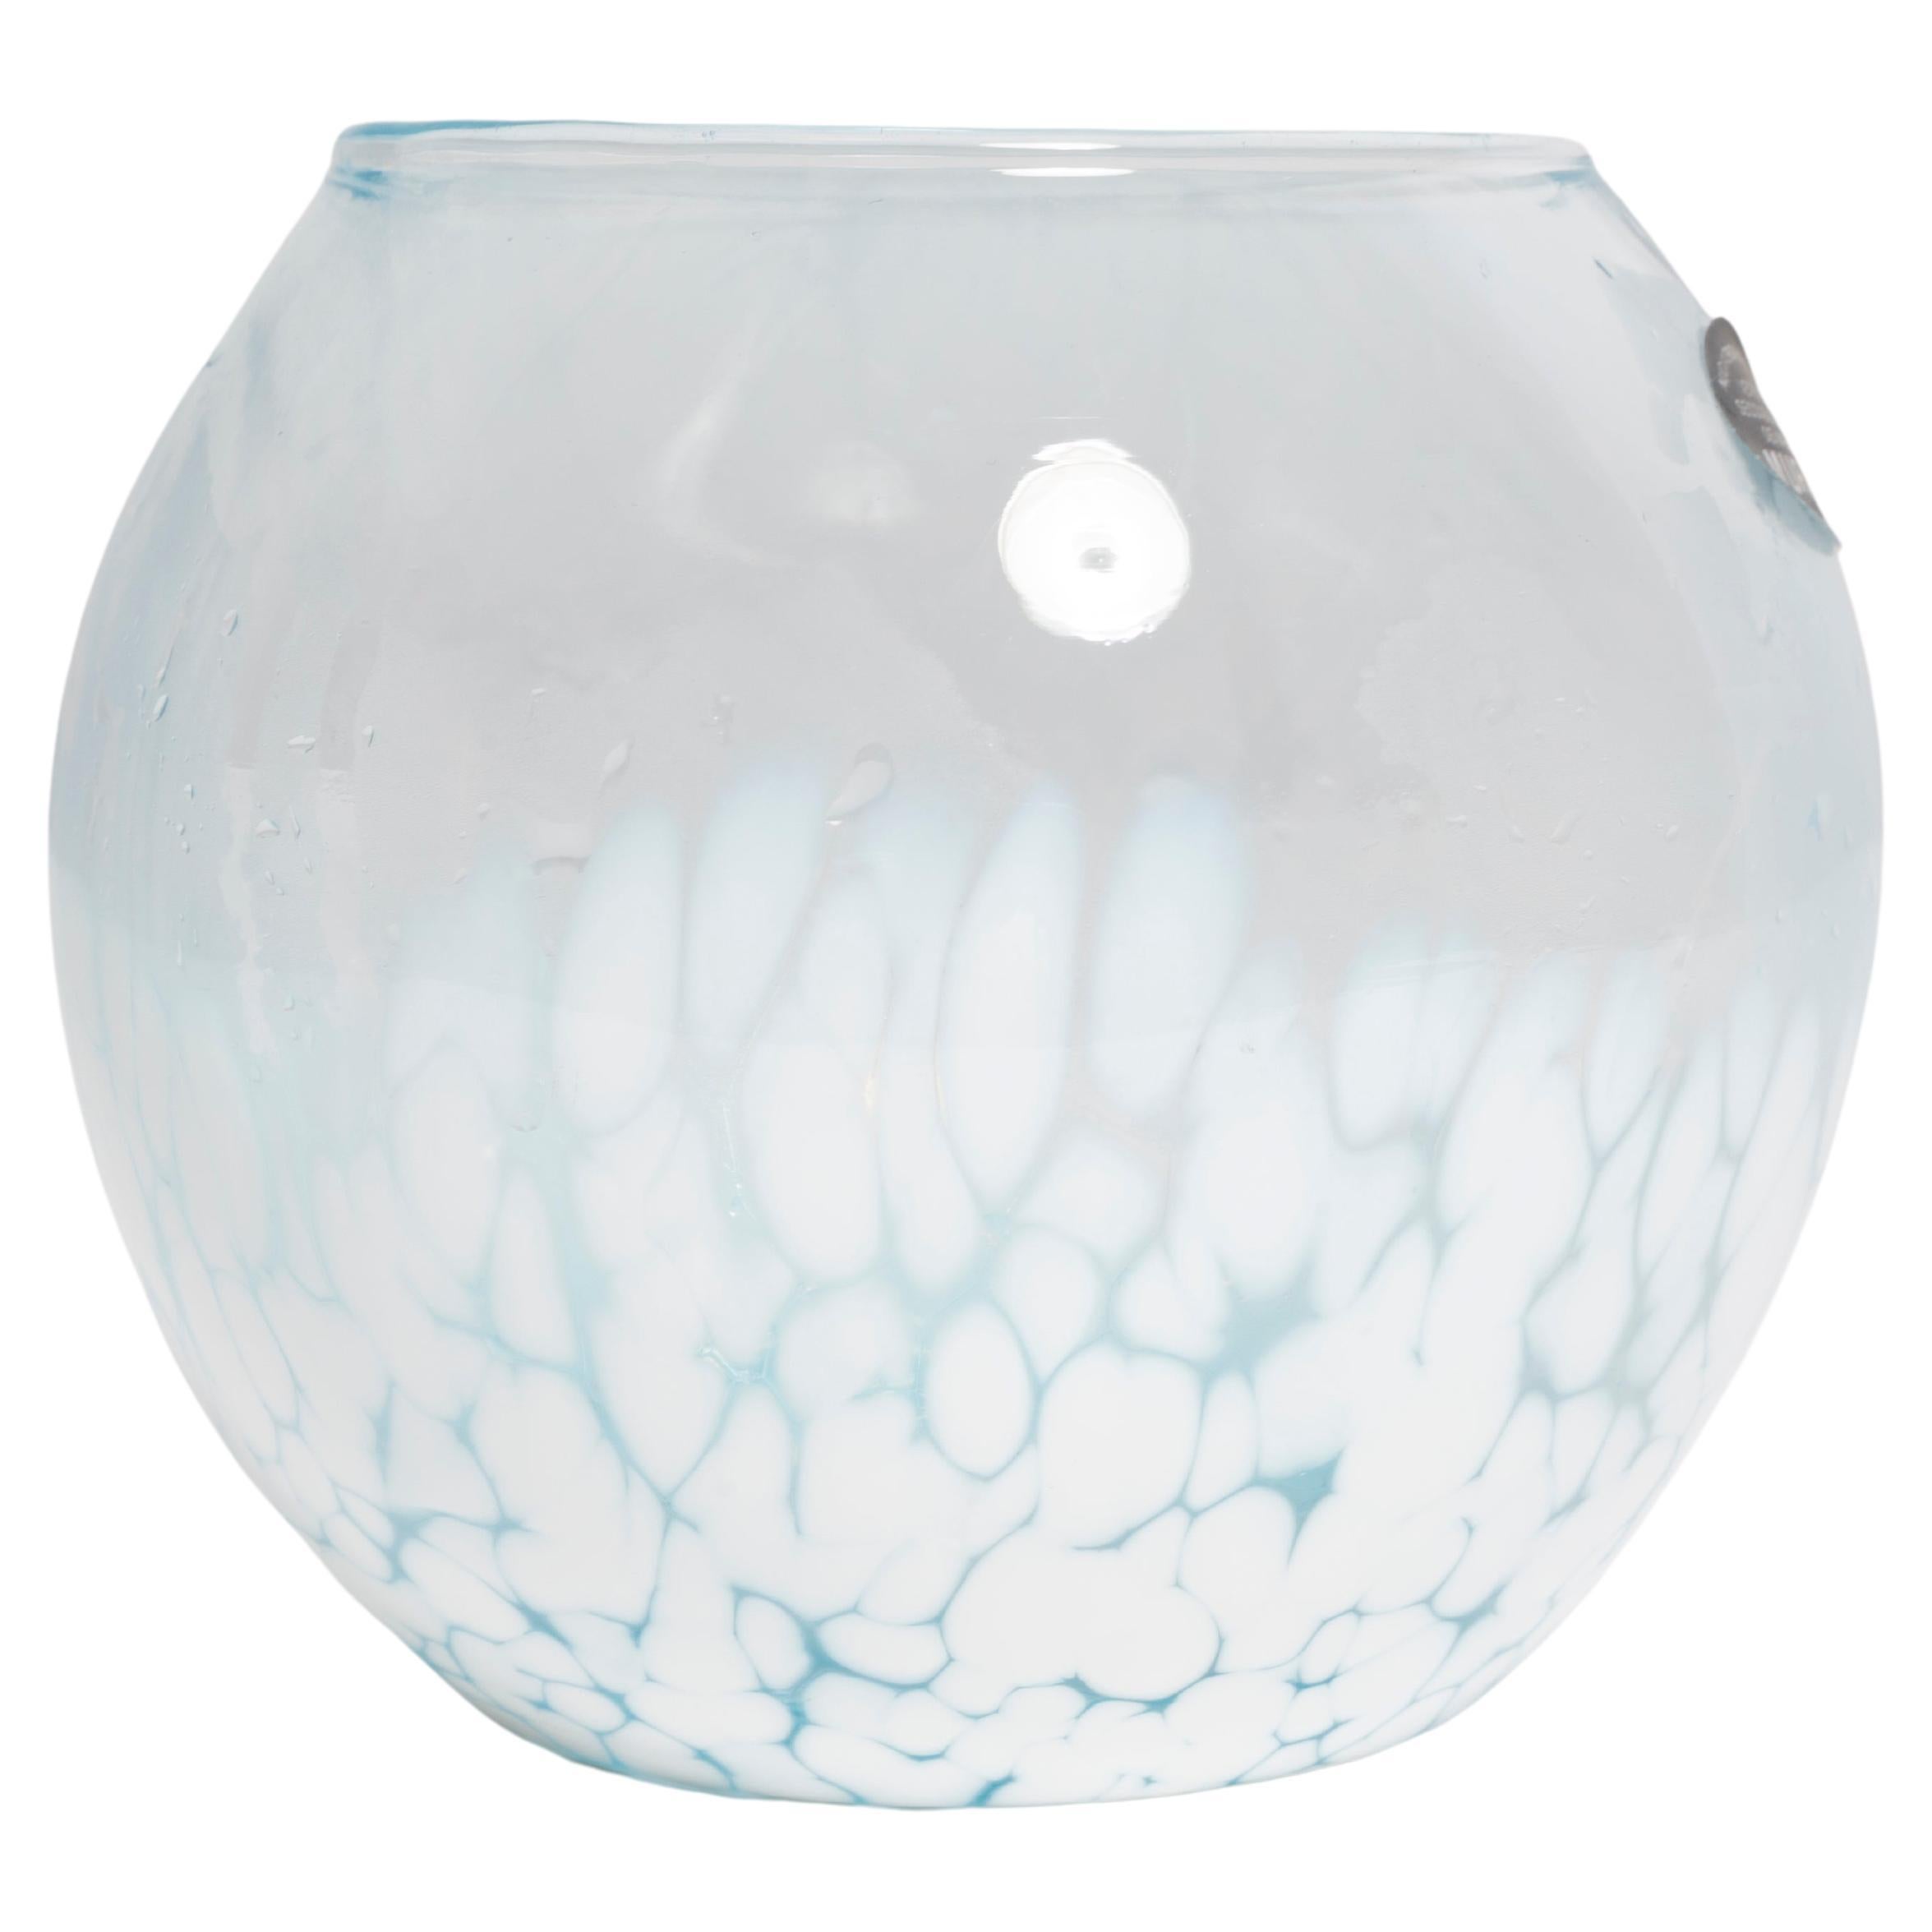 Vintage White and Blue Decorative Murano Glass Mini Vase, Italy, 1960s For Sale